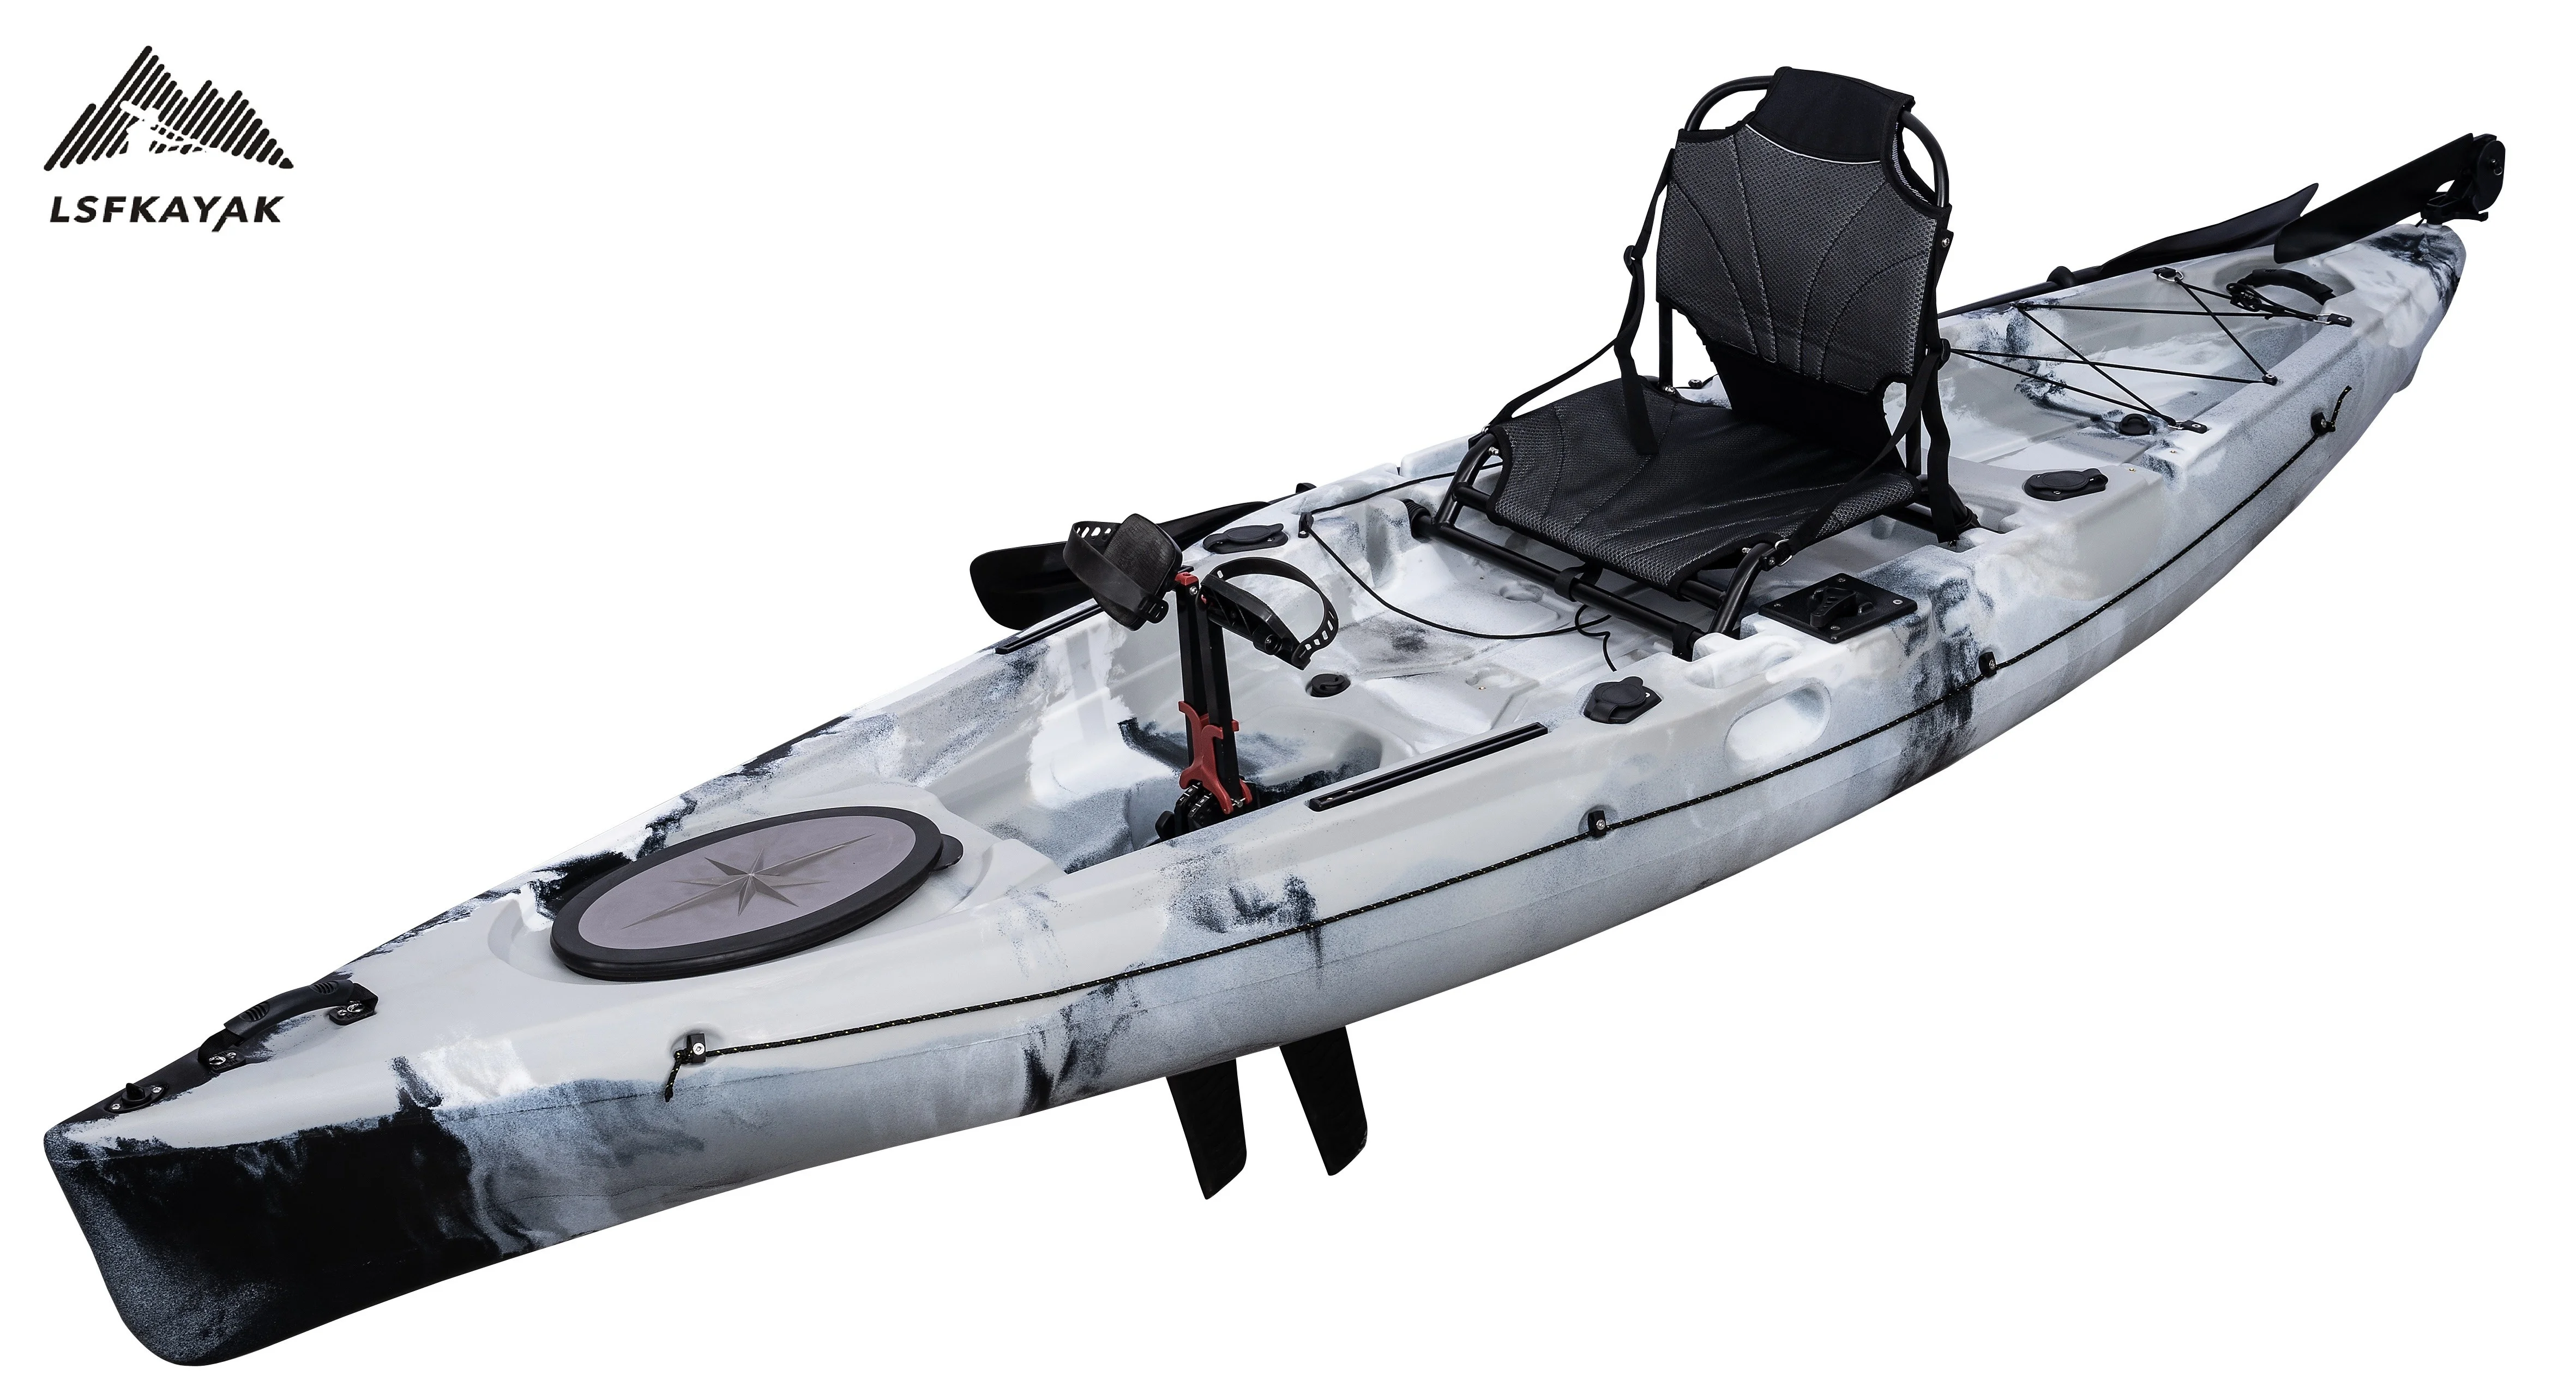 Pedal Drive Fishing Kayak for One